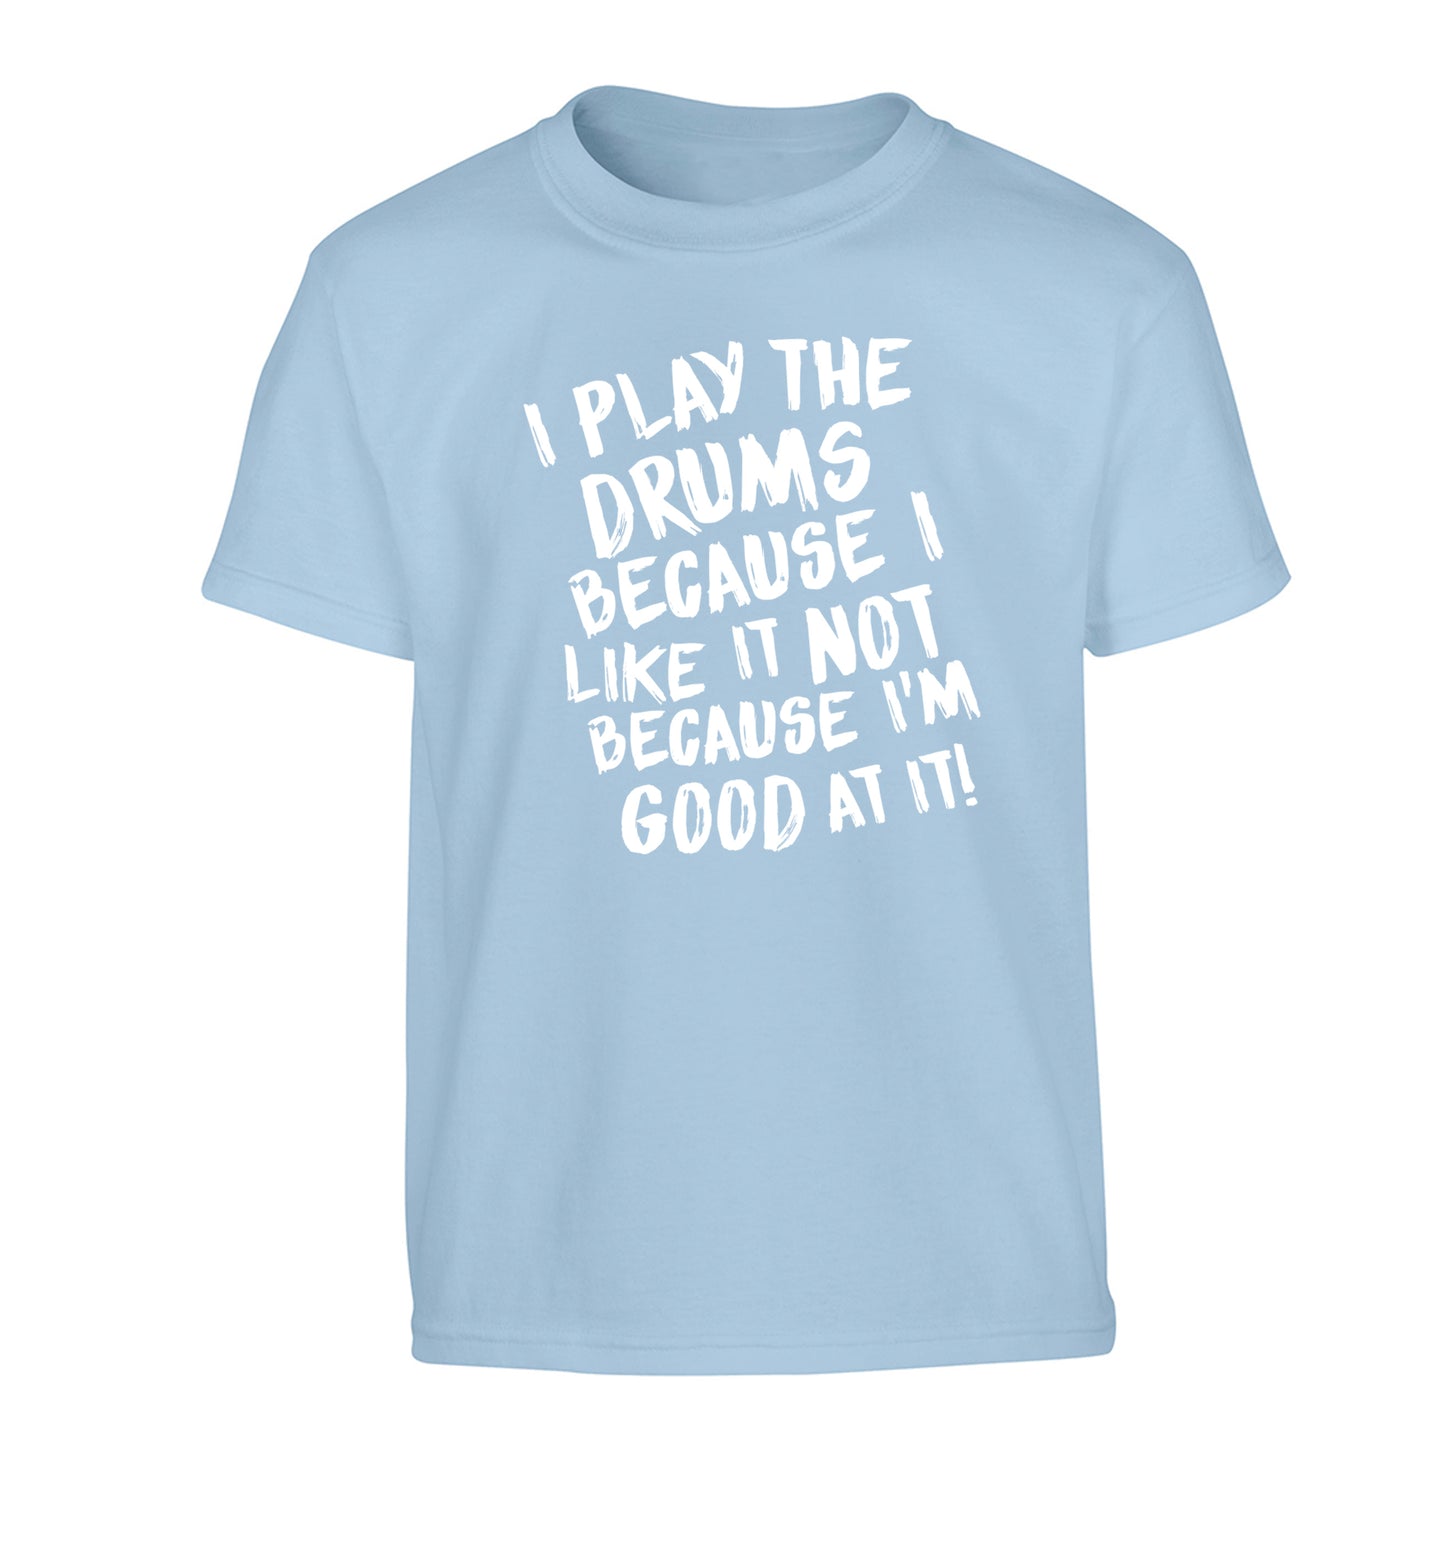 I play the drums because I like it not because I'm good at it Children's light blue Tshirt 12-14 Years